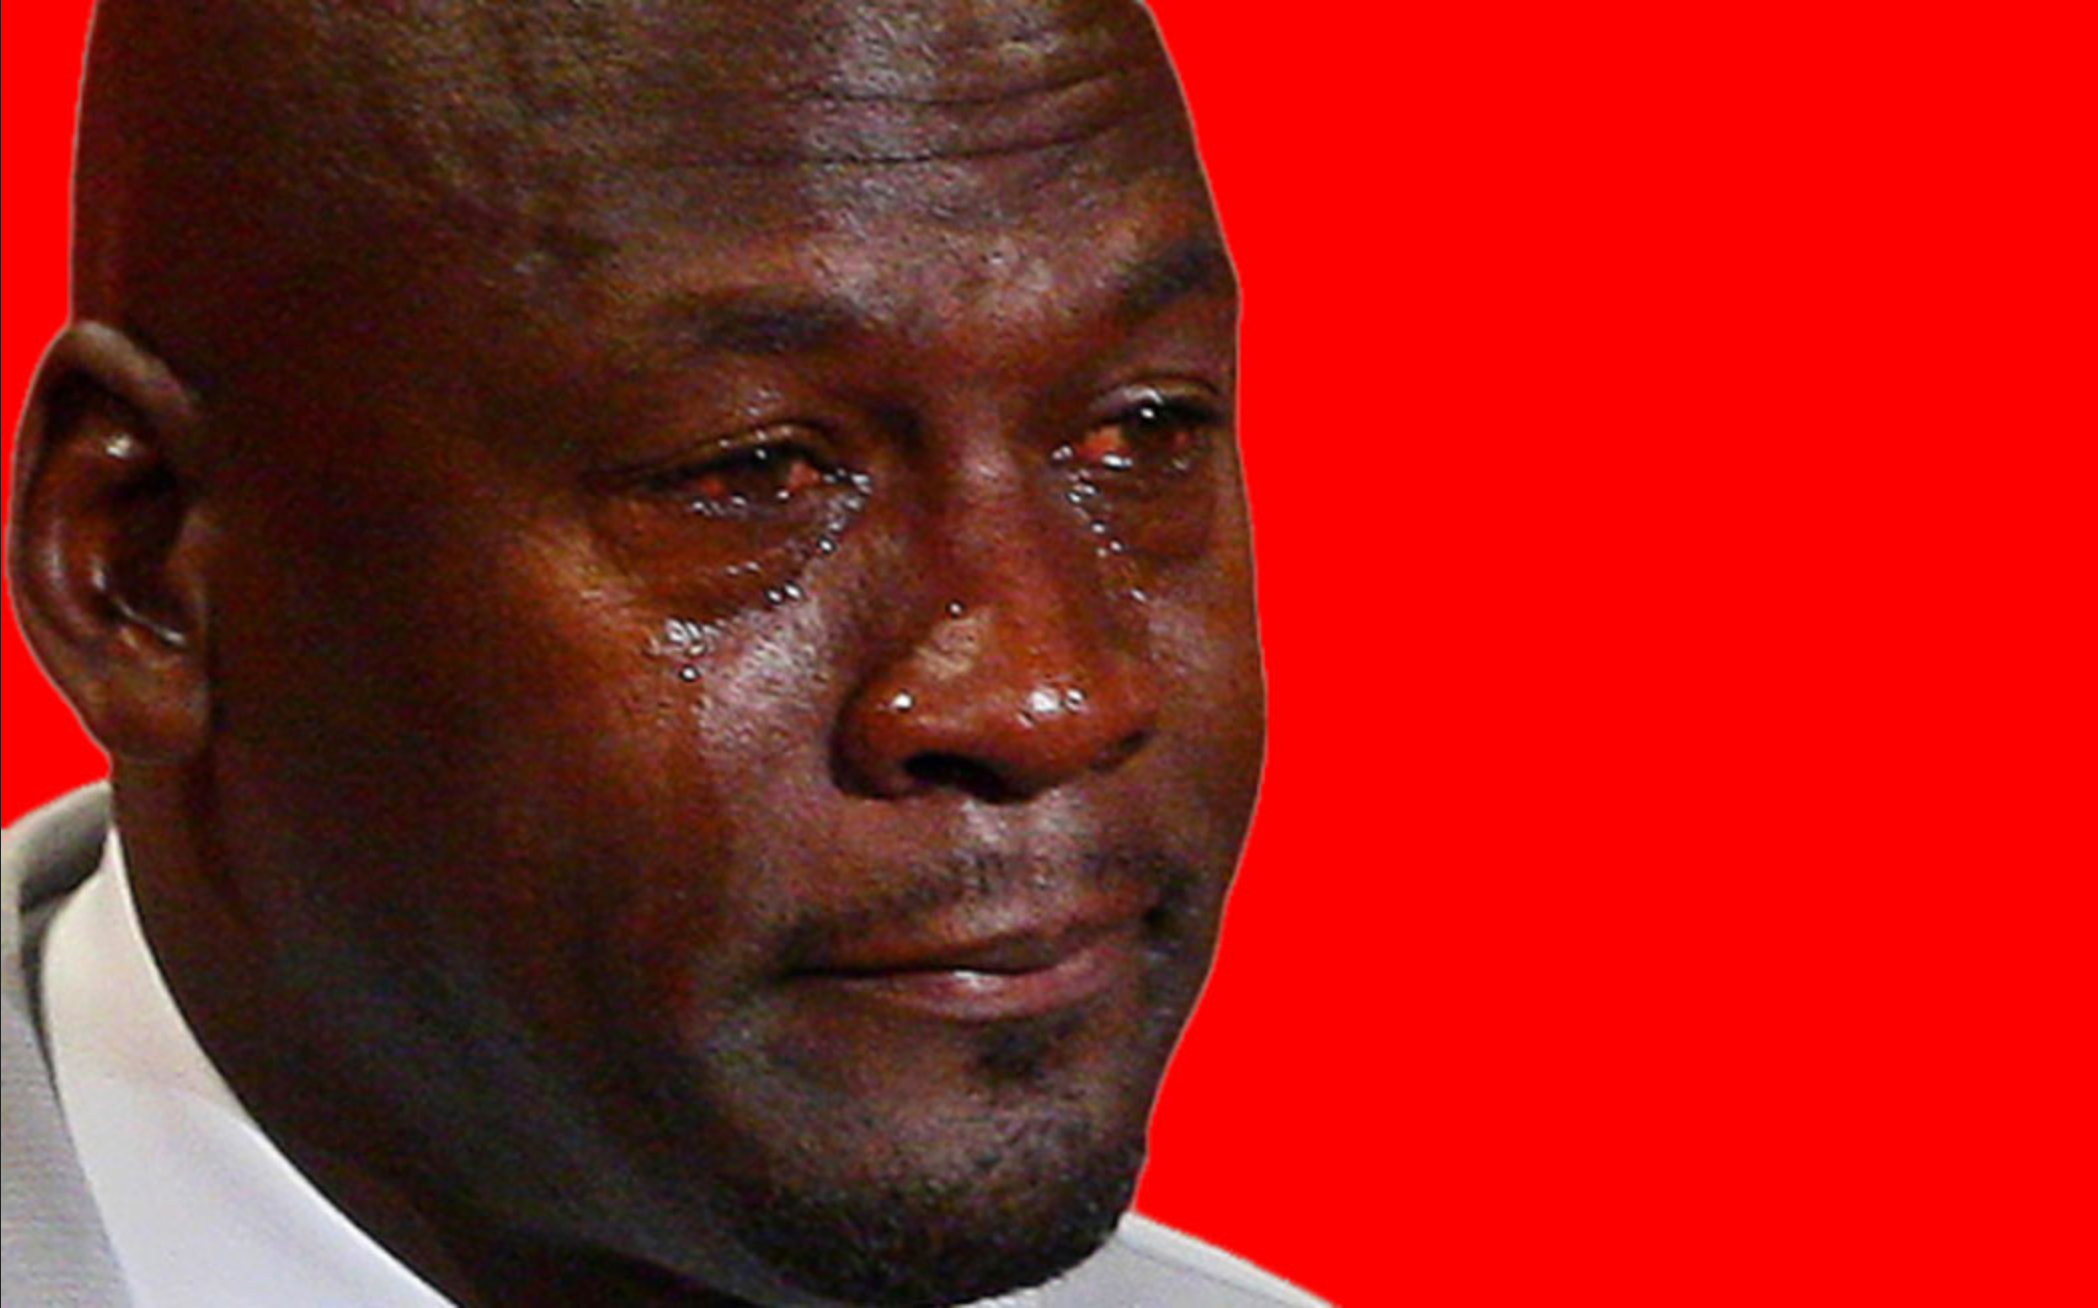 The Crying Jordan meme makes it onto Jeopardy!, sadly, isn't going anywhere  | This is the Loop | Golf Digest